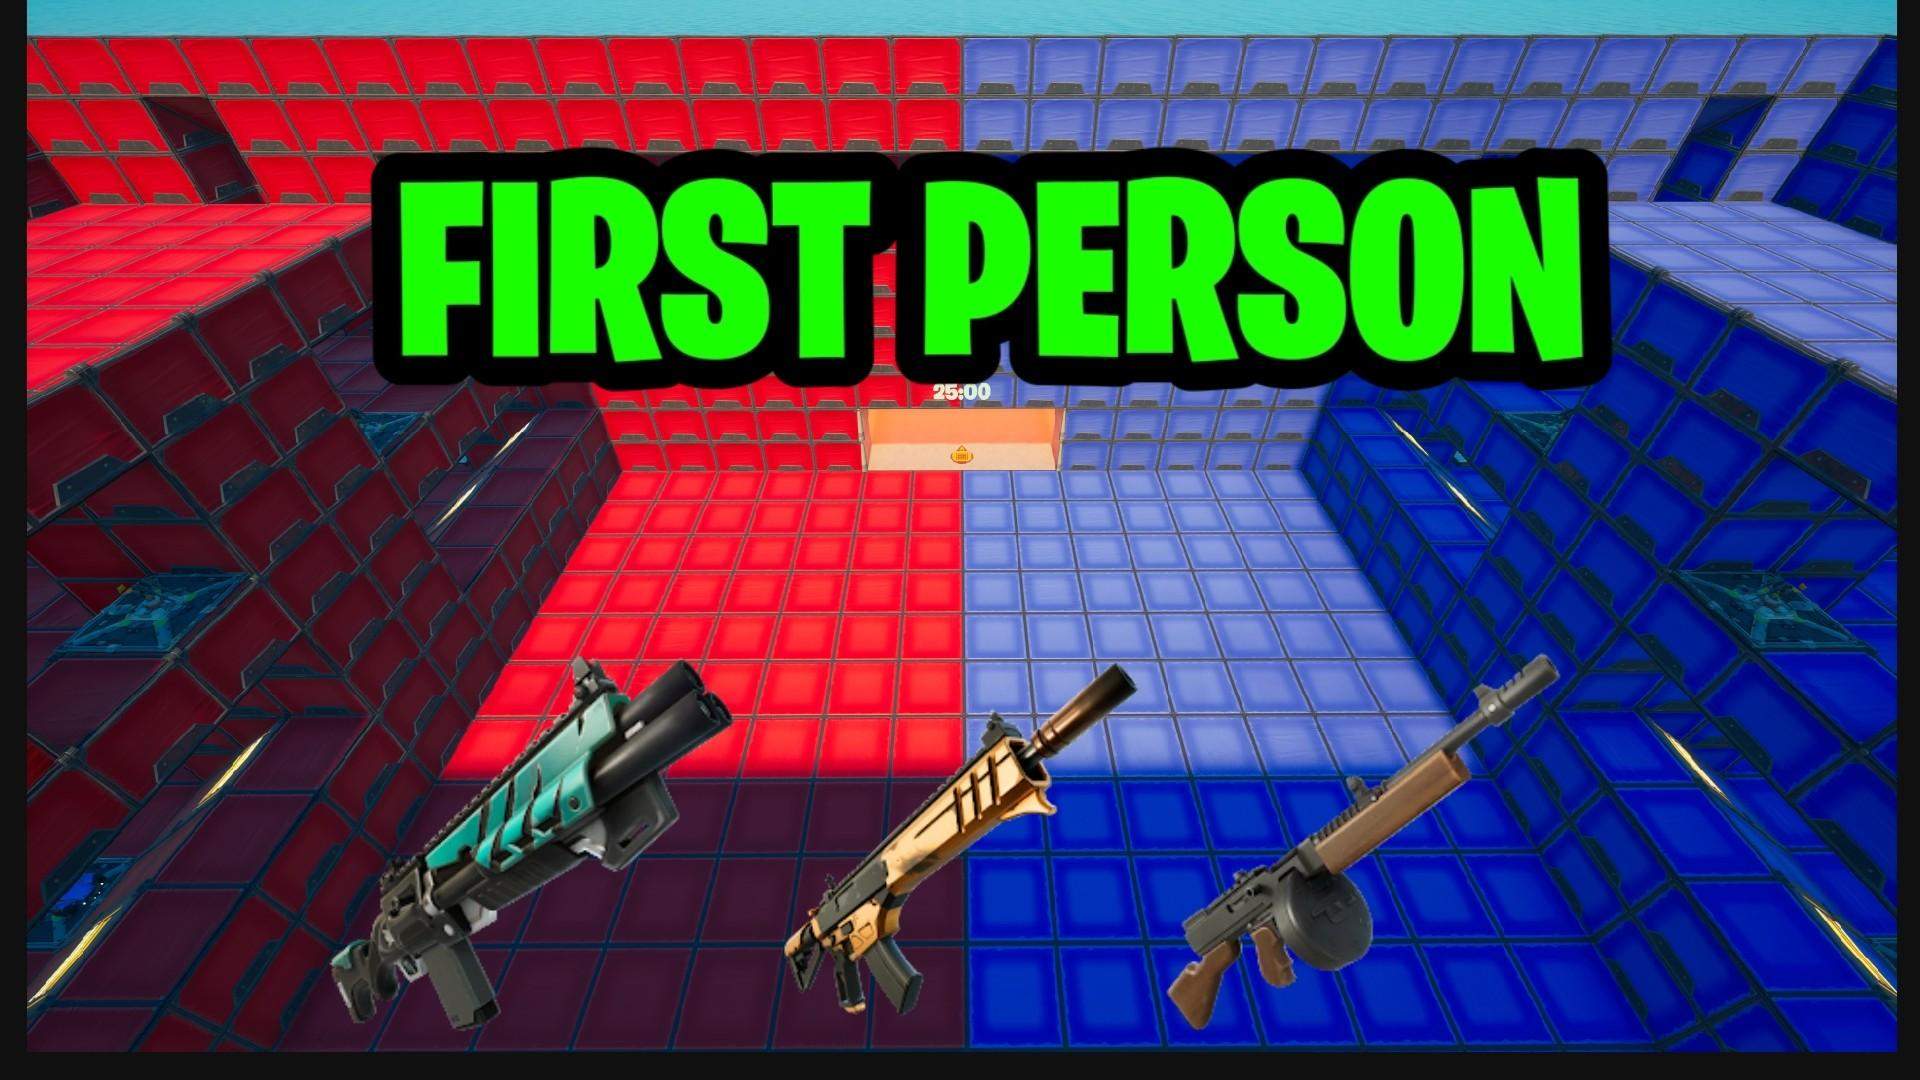 Red vs blue First Person🔴🔵